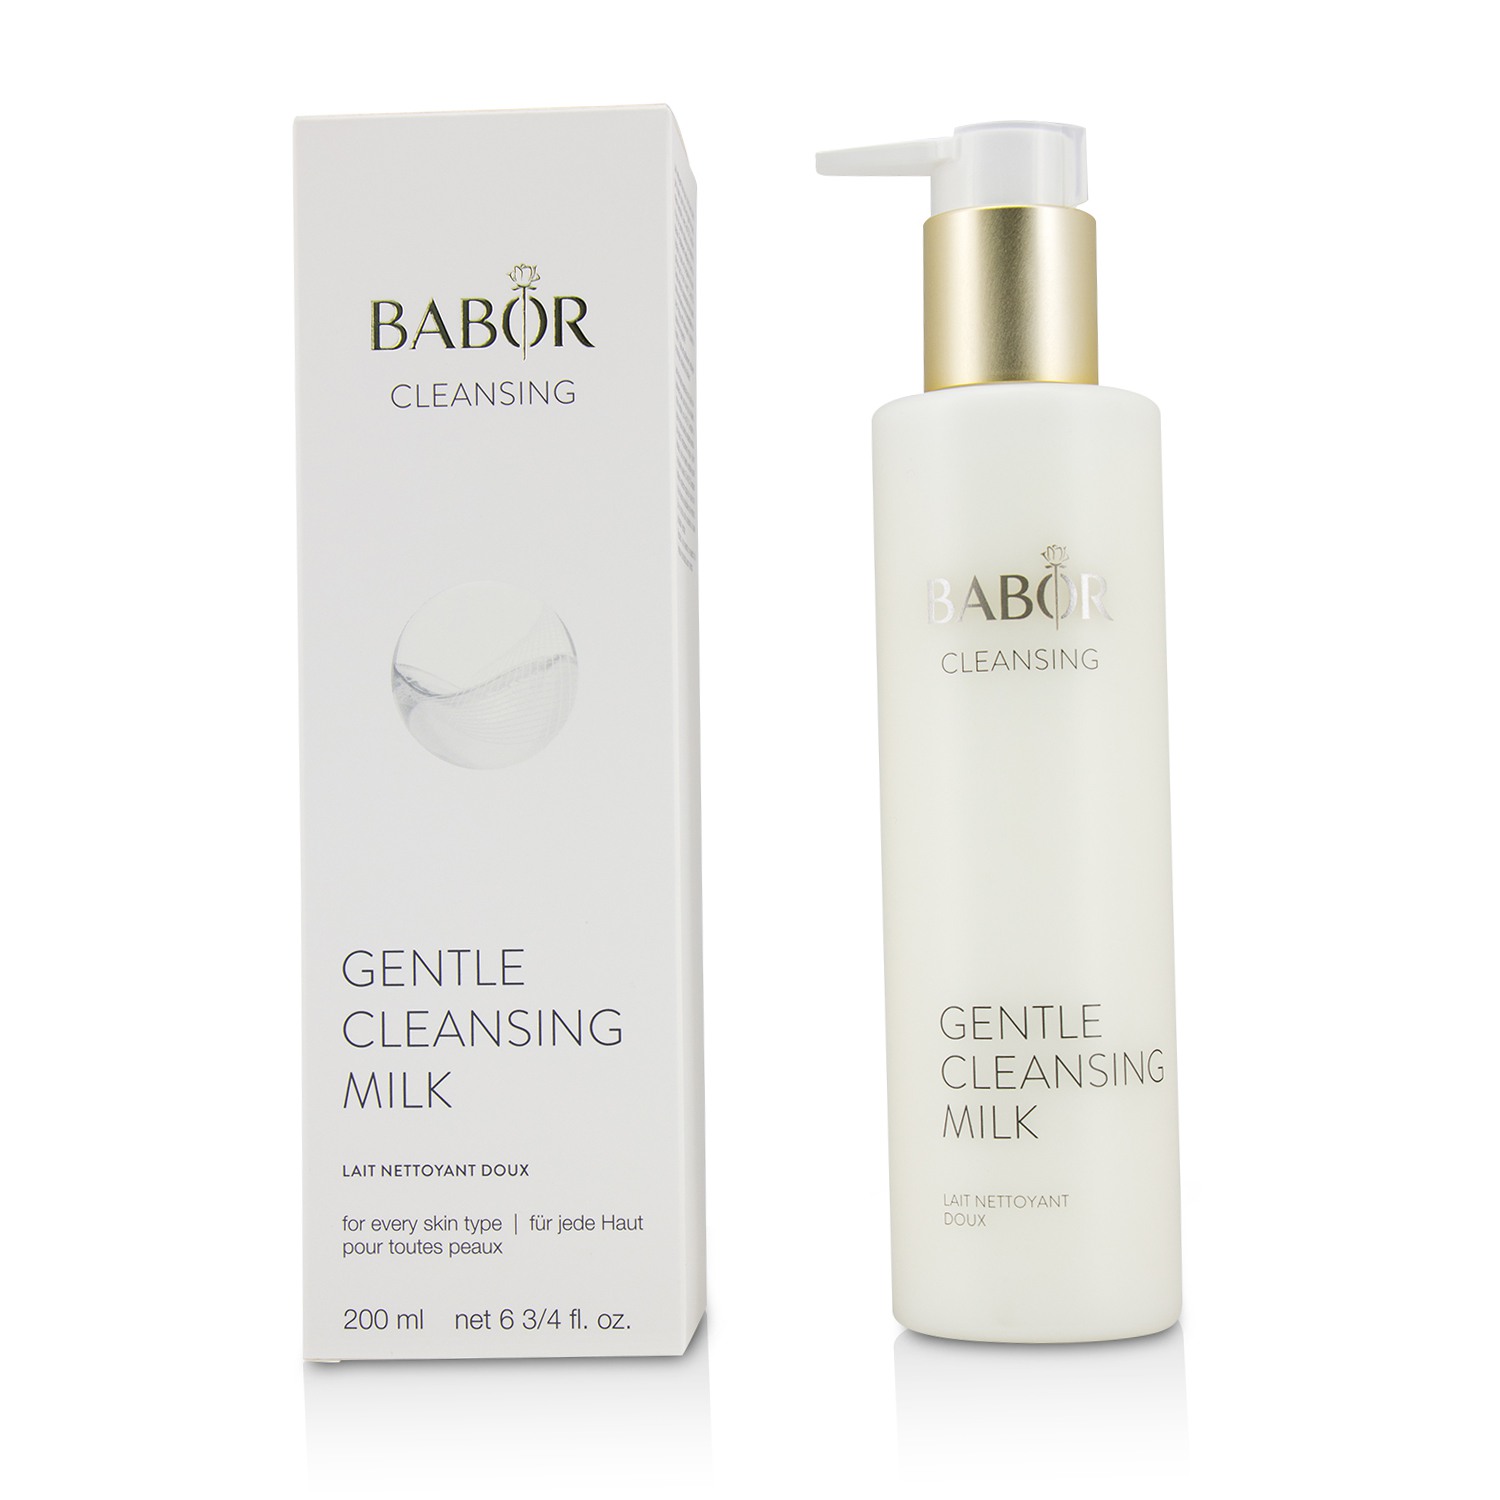 CLEANSING Gentle Cleansing Milk - For All Skin Types Babor Image